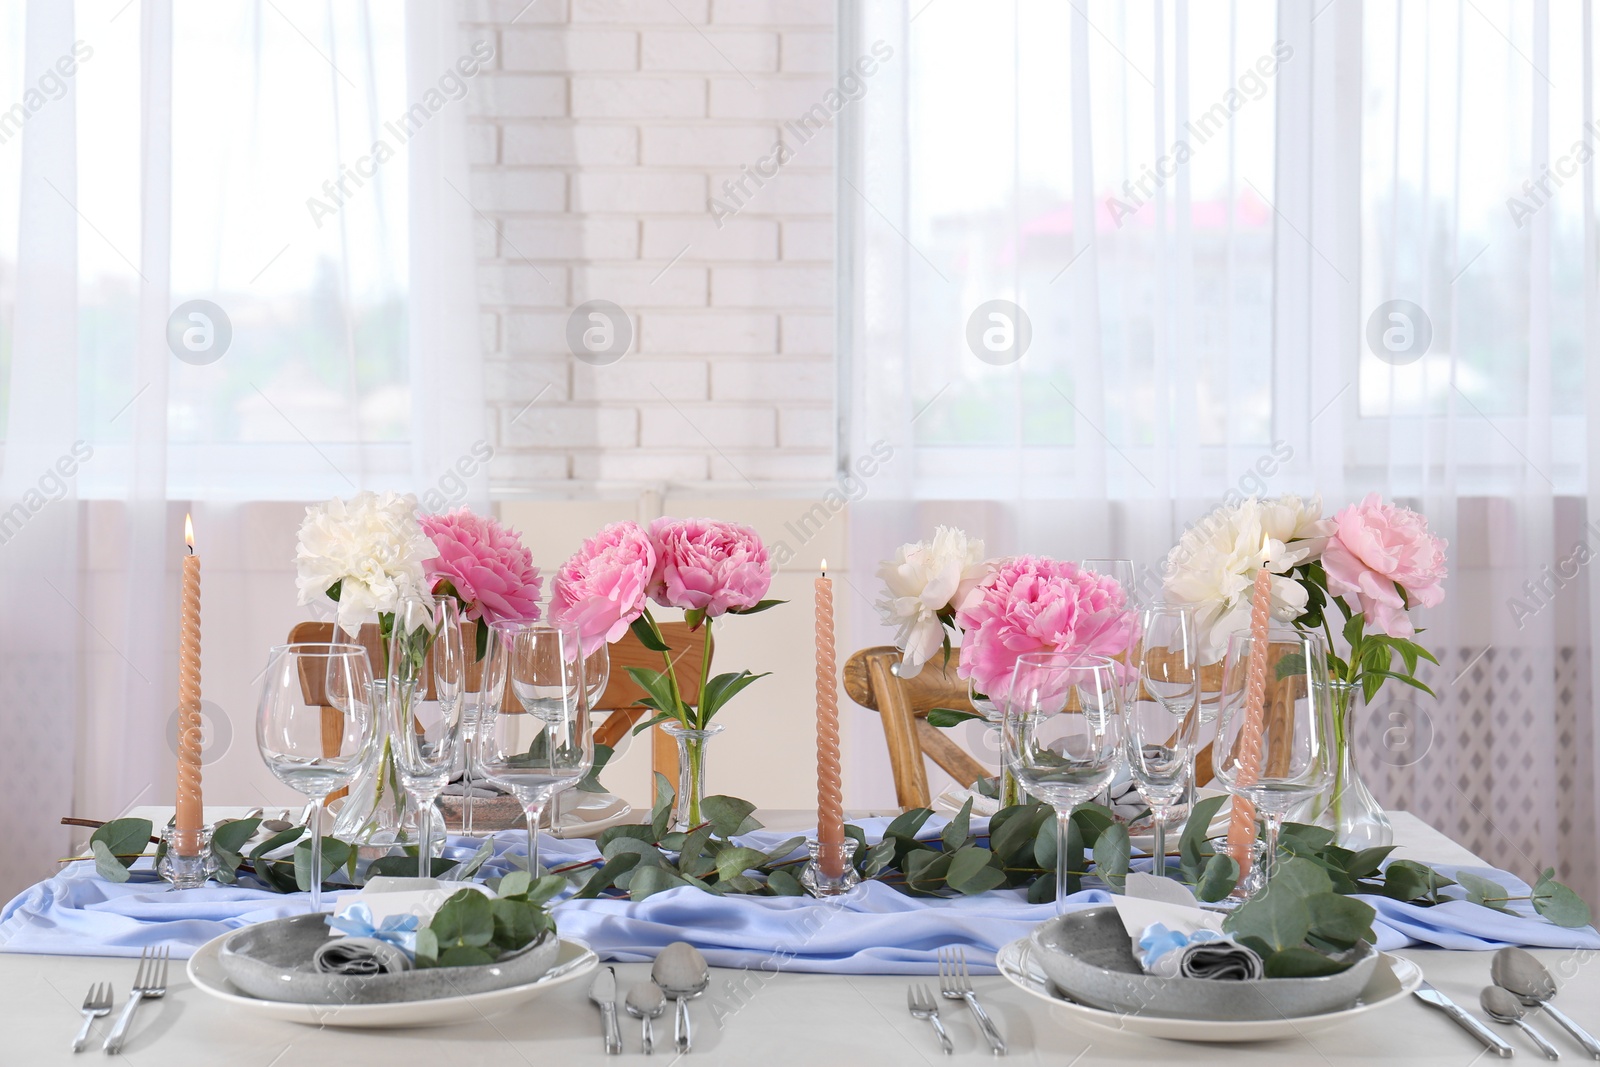 Photo of Beautiful table setting. Plates with greeting cards, napkins and branches near glasses, peonies, burning candles and cutlery on table in room